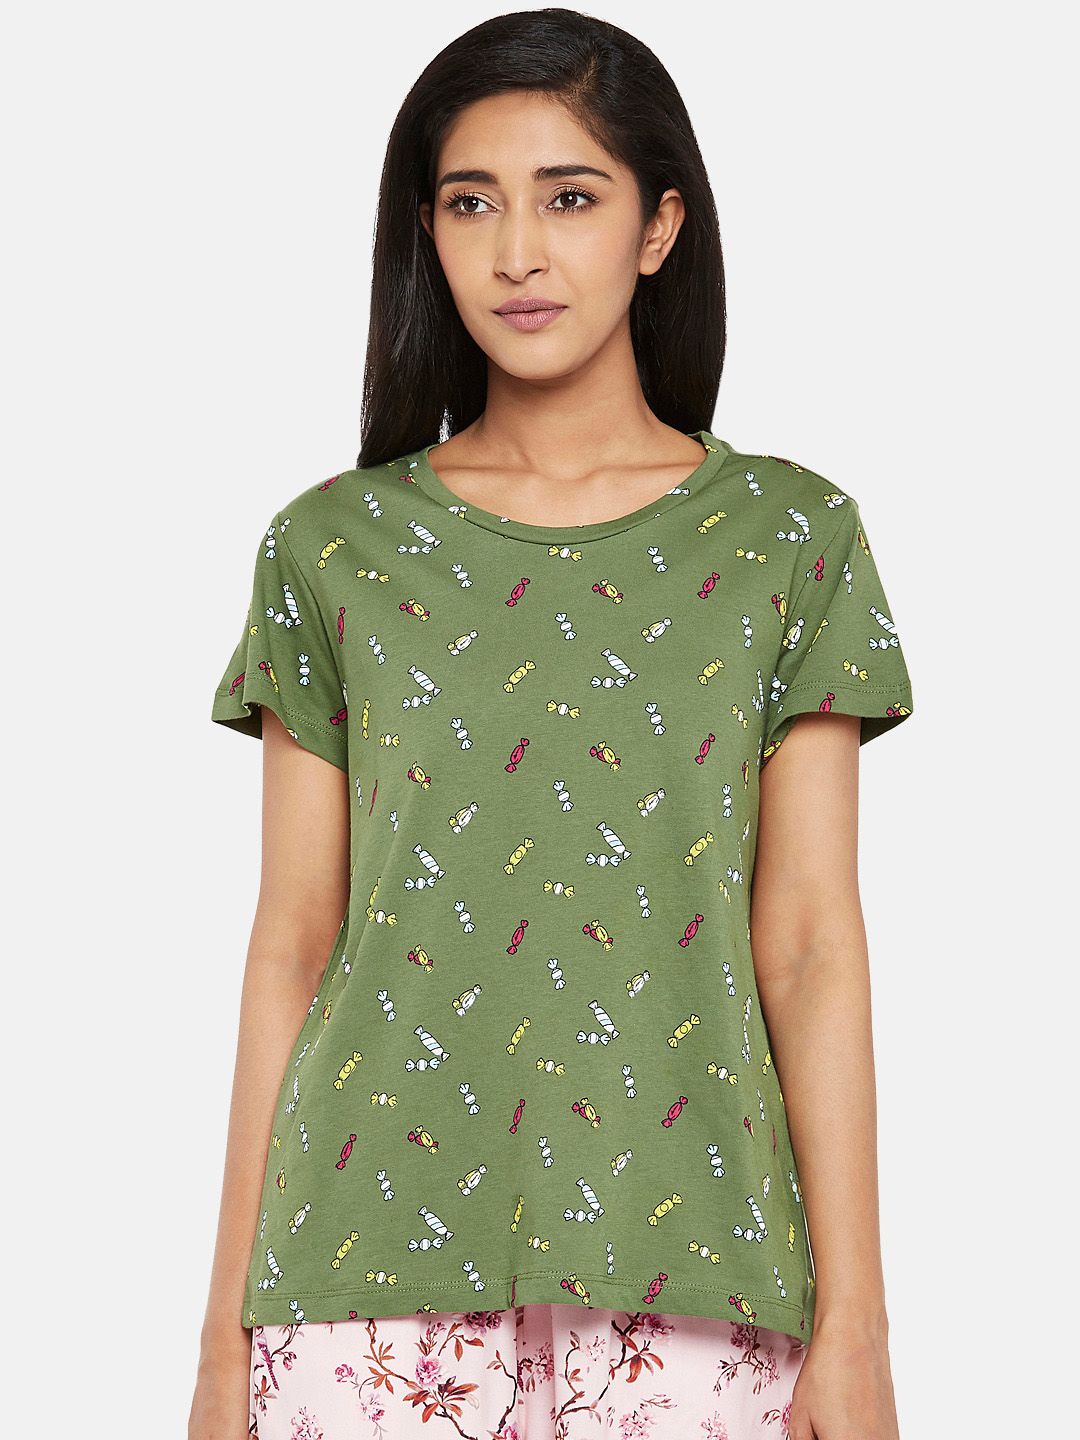 Dreamz by Pantaloons Olive Green Printed Pure Cotton Regular Lounge tshirt Price in India